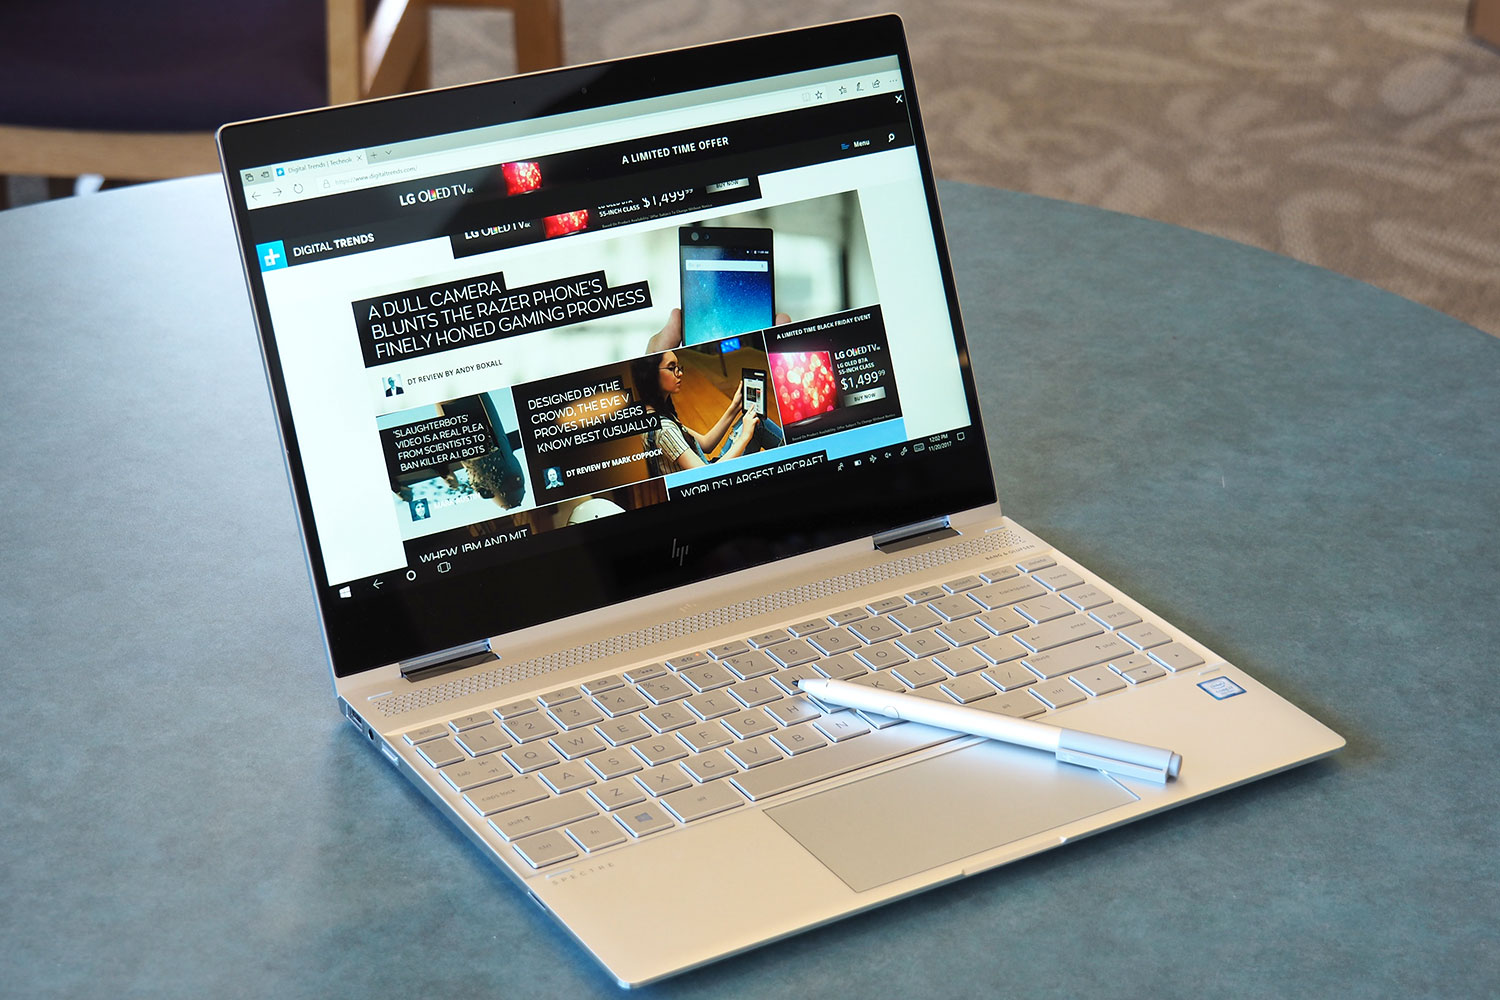 HP Spectre x360 13 (Late 2017) Review: Our Favorite 2-in-1